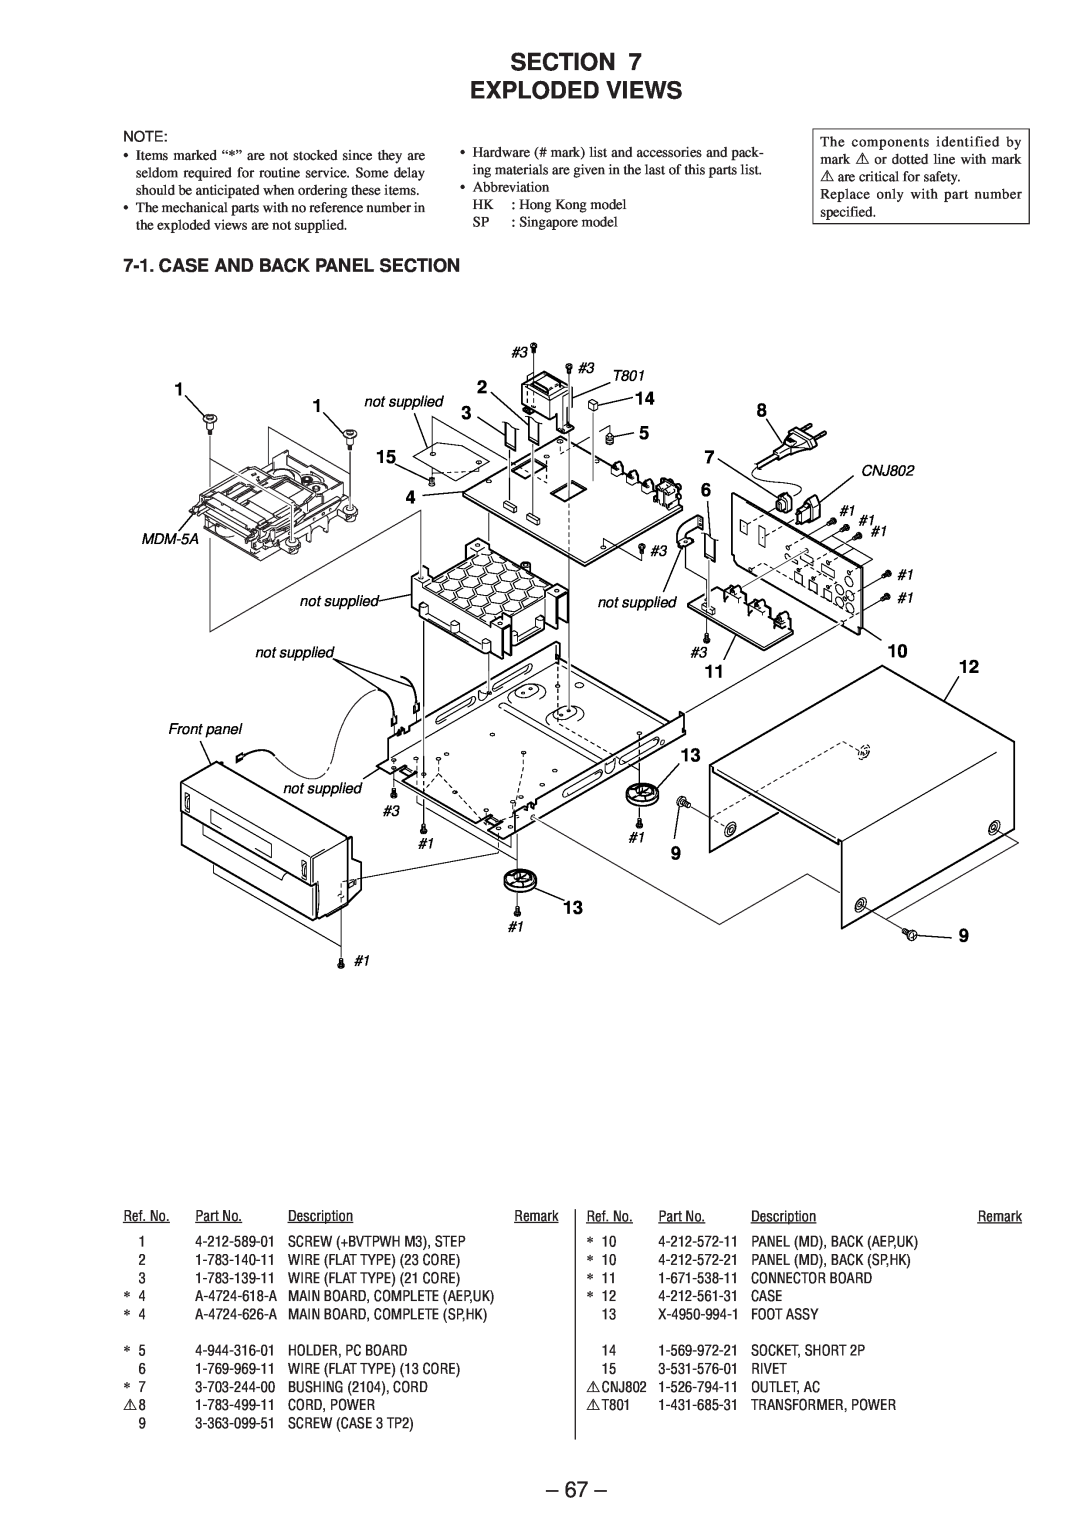 Sony MDS-SD1 service manual Section Exploded Views, Case And Back Panel Section 